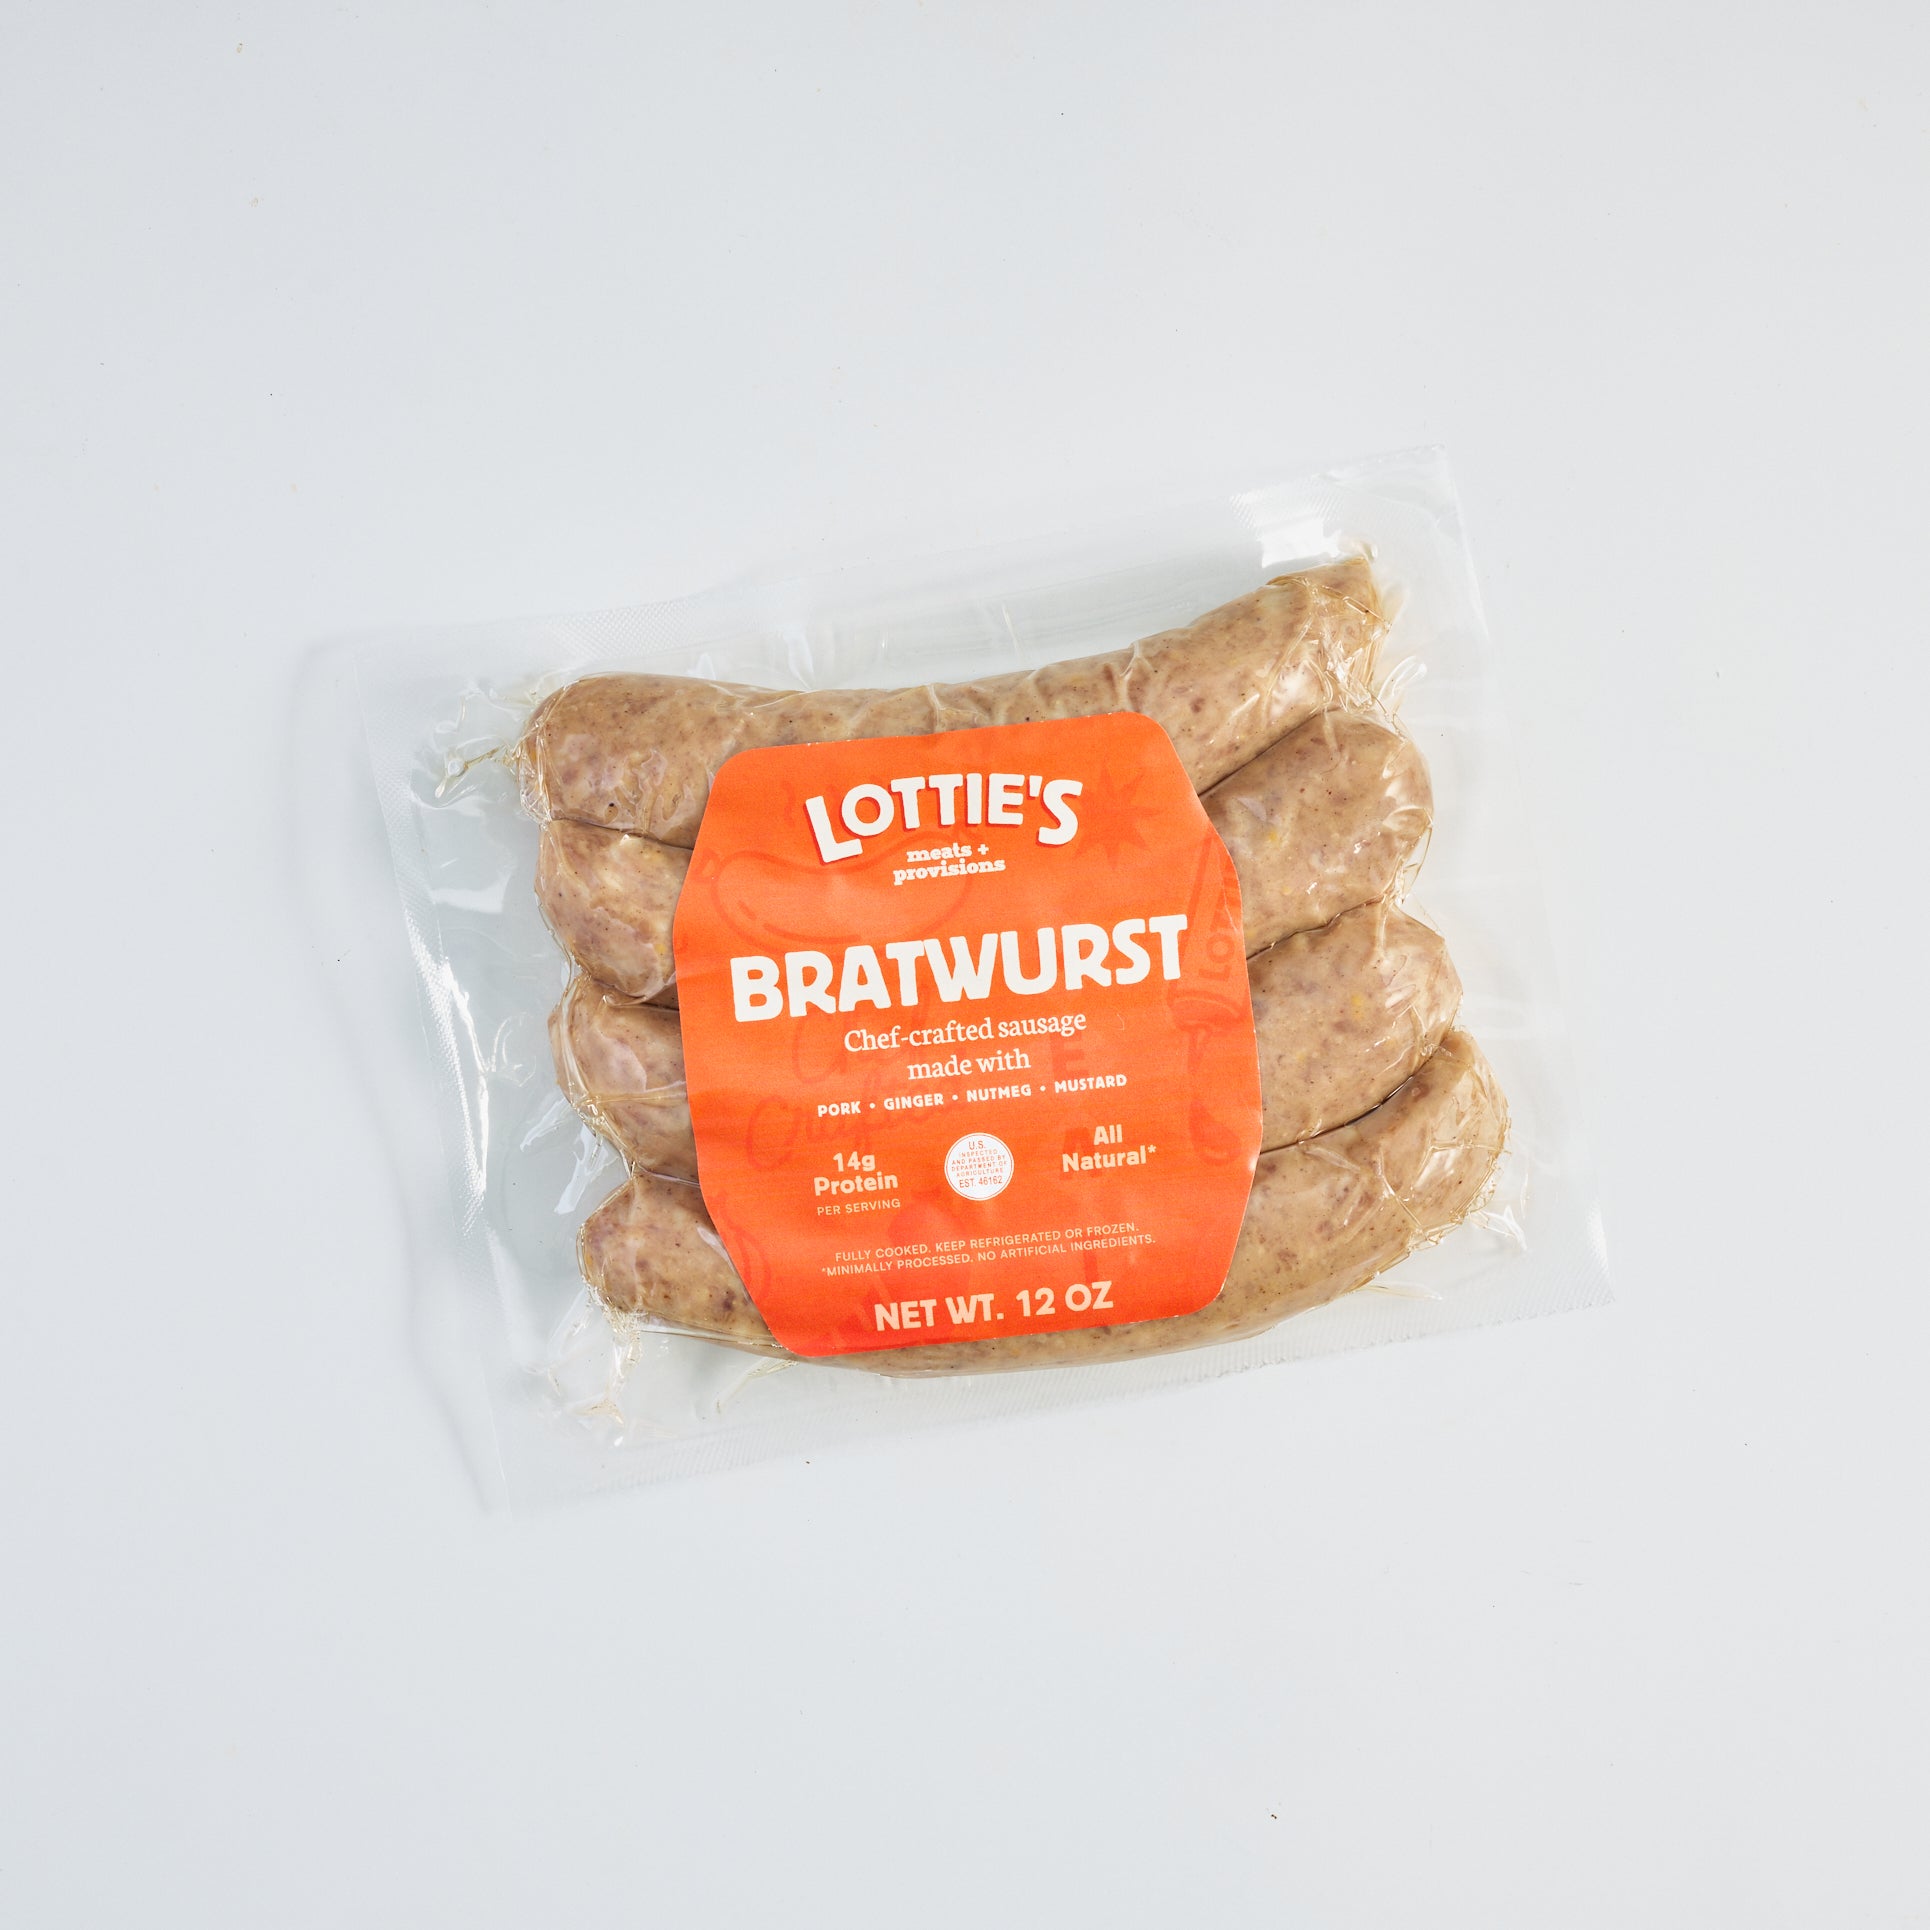 The Bratwurst | Fully Cooked Sausage | 4-Packs